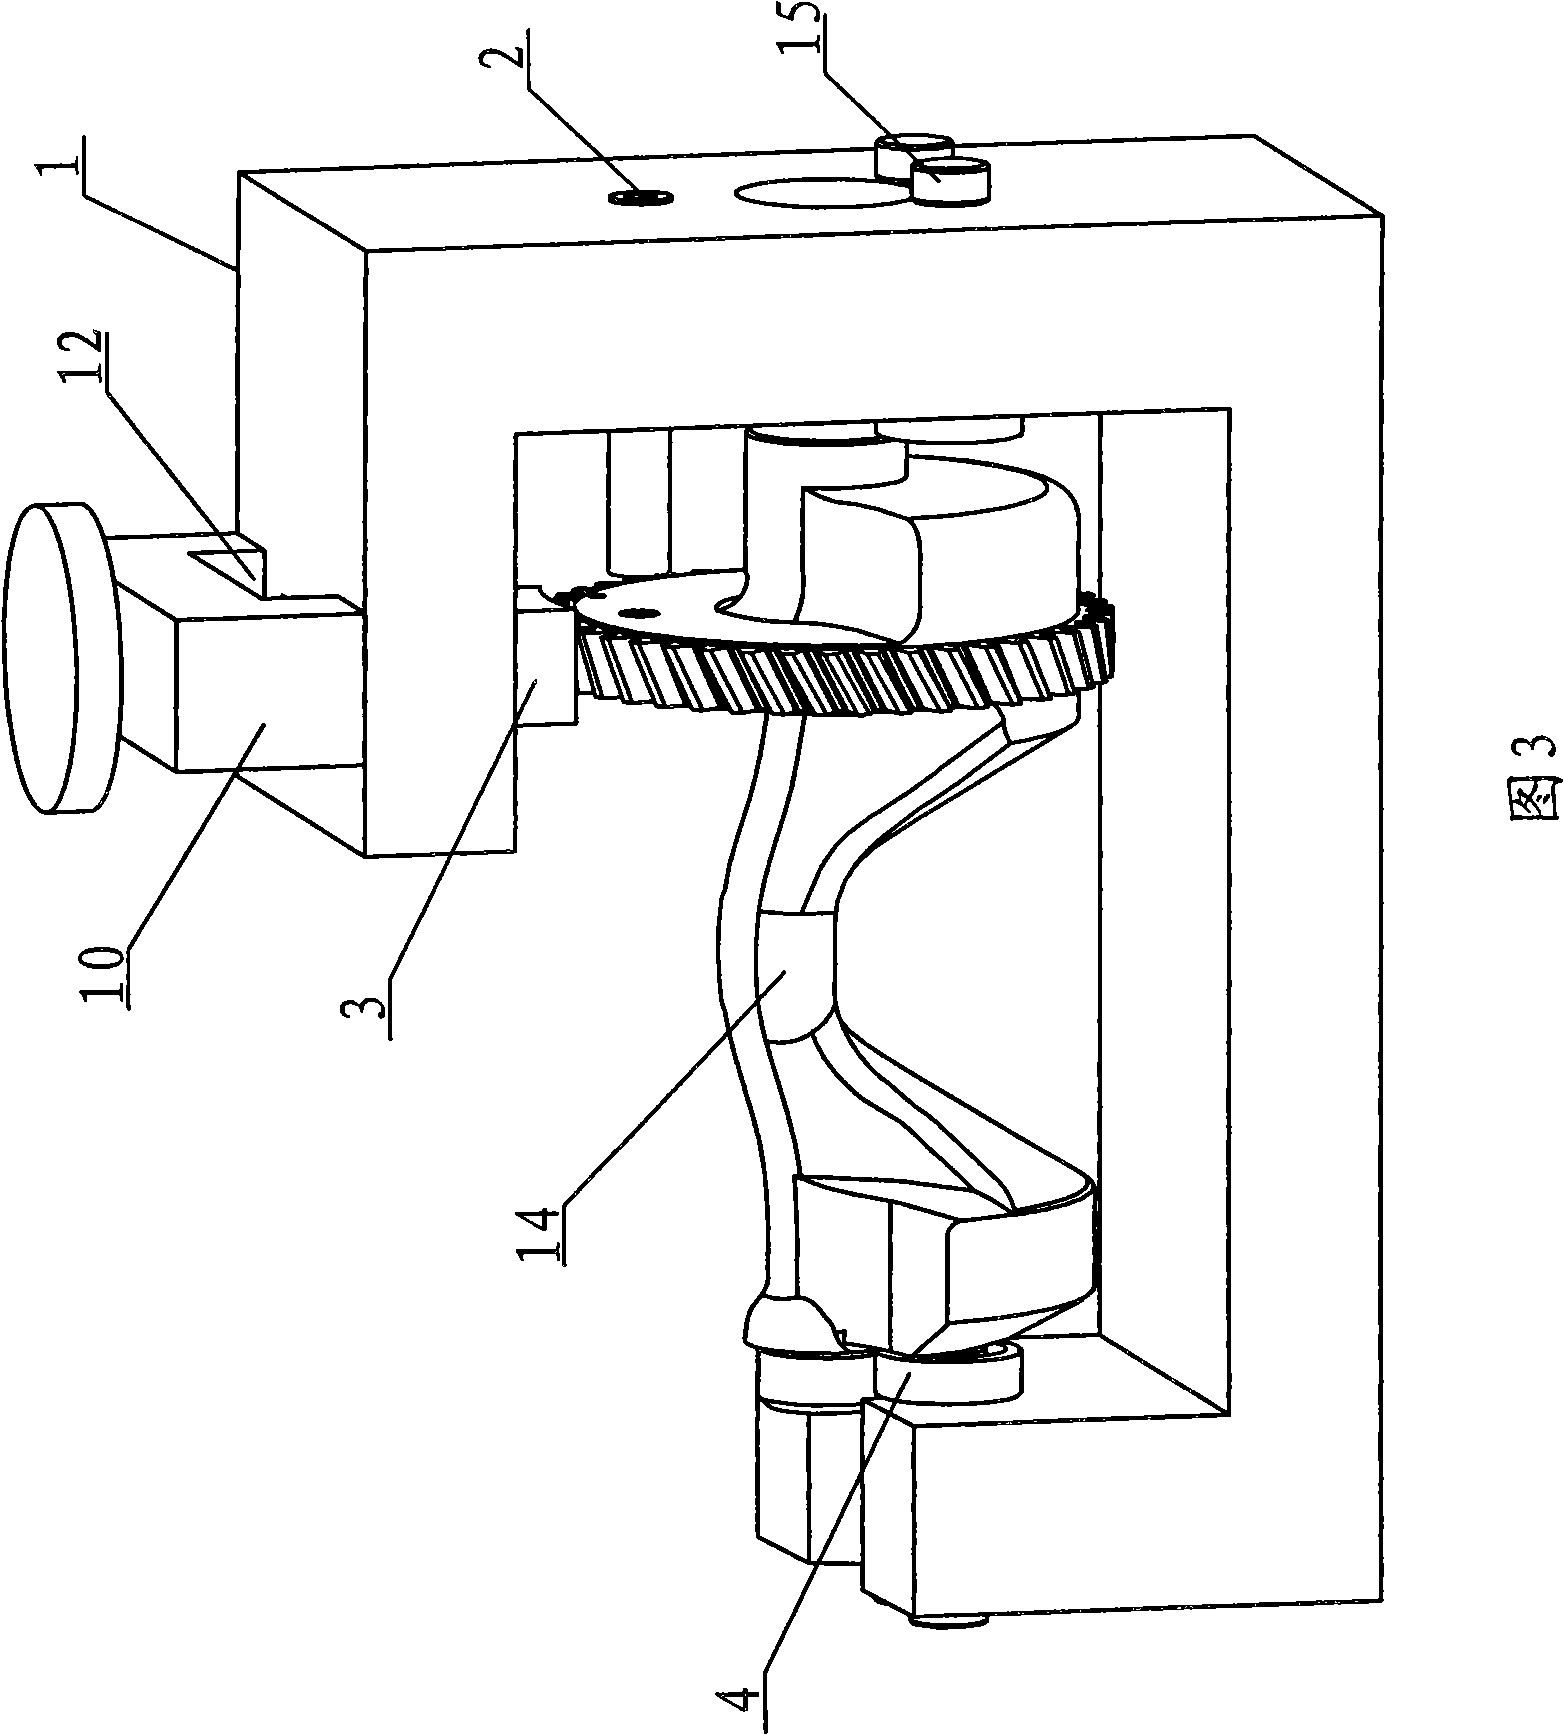 Positioning method for trunnion shaft assembly phase point